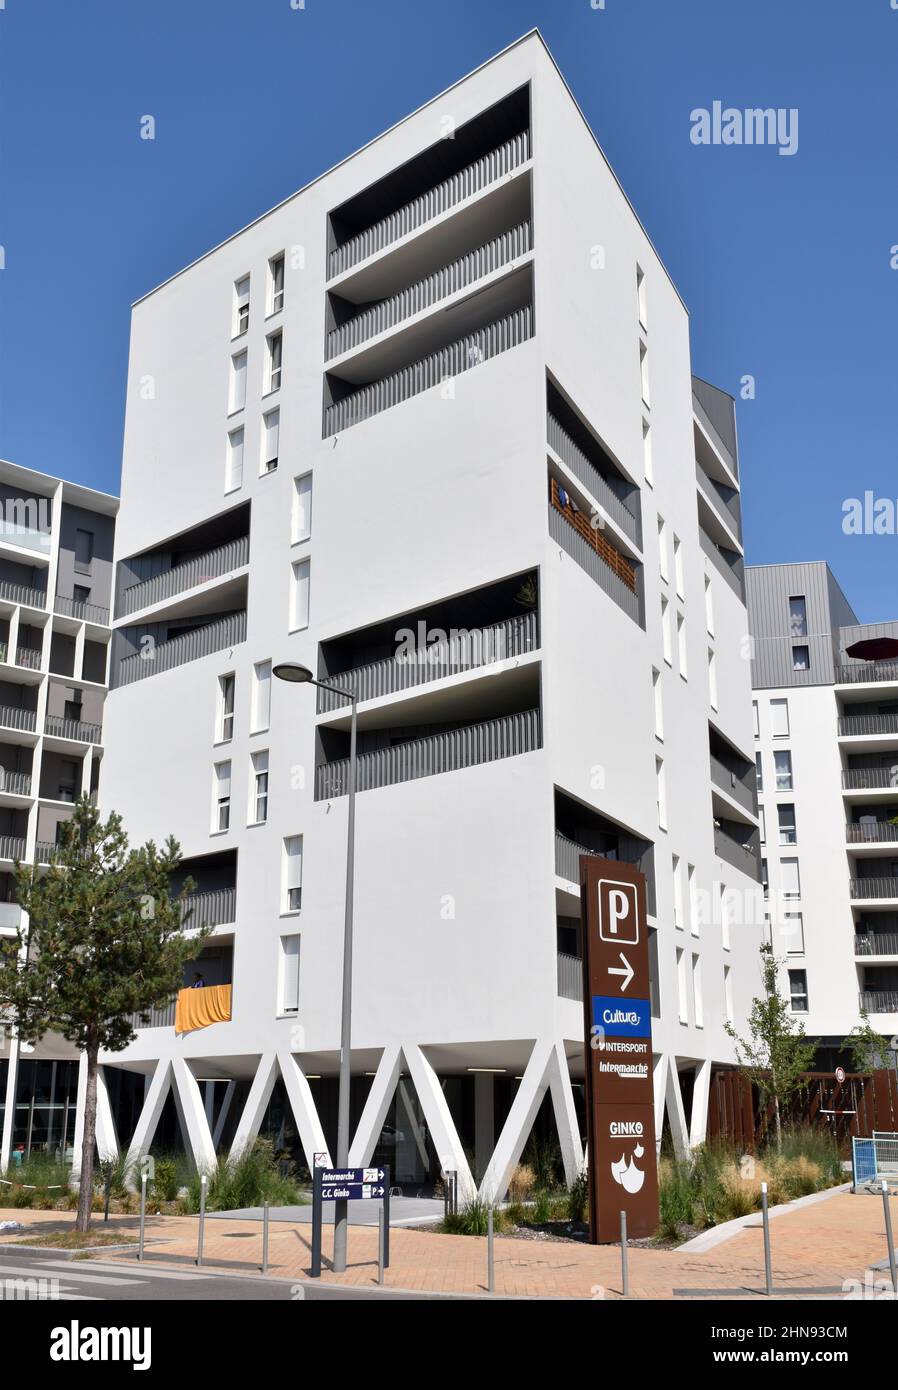 A six storey apartment building, clad in white ceramic tiles, white shutters and some set backs and projecting balconies creating a Mediterranean feel Stock Photo